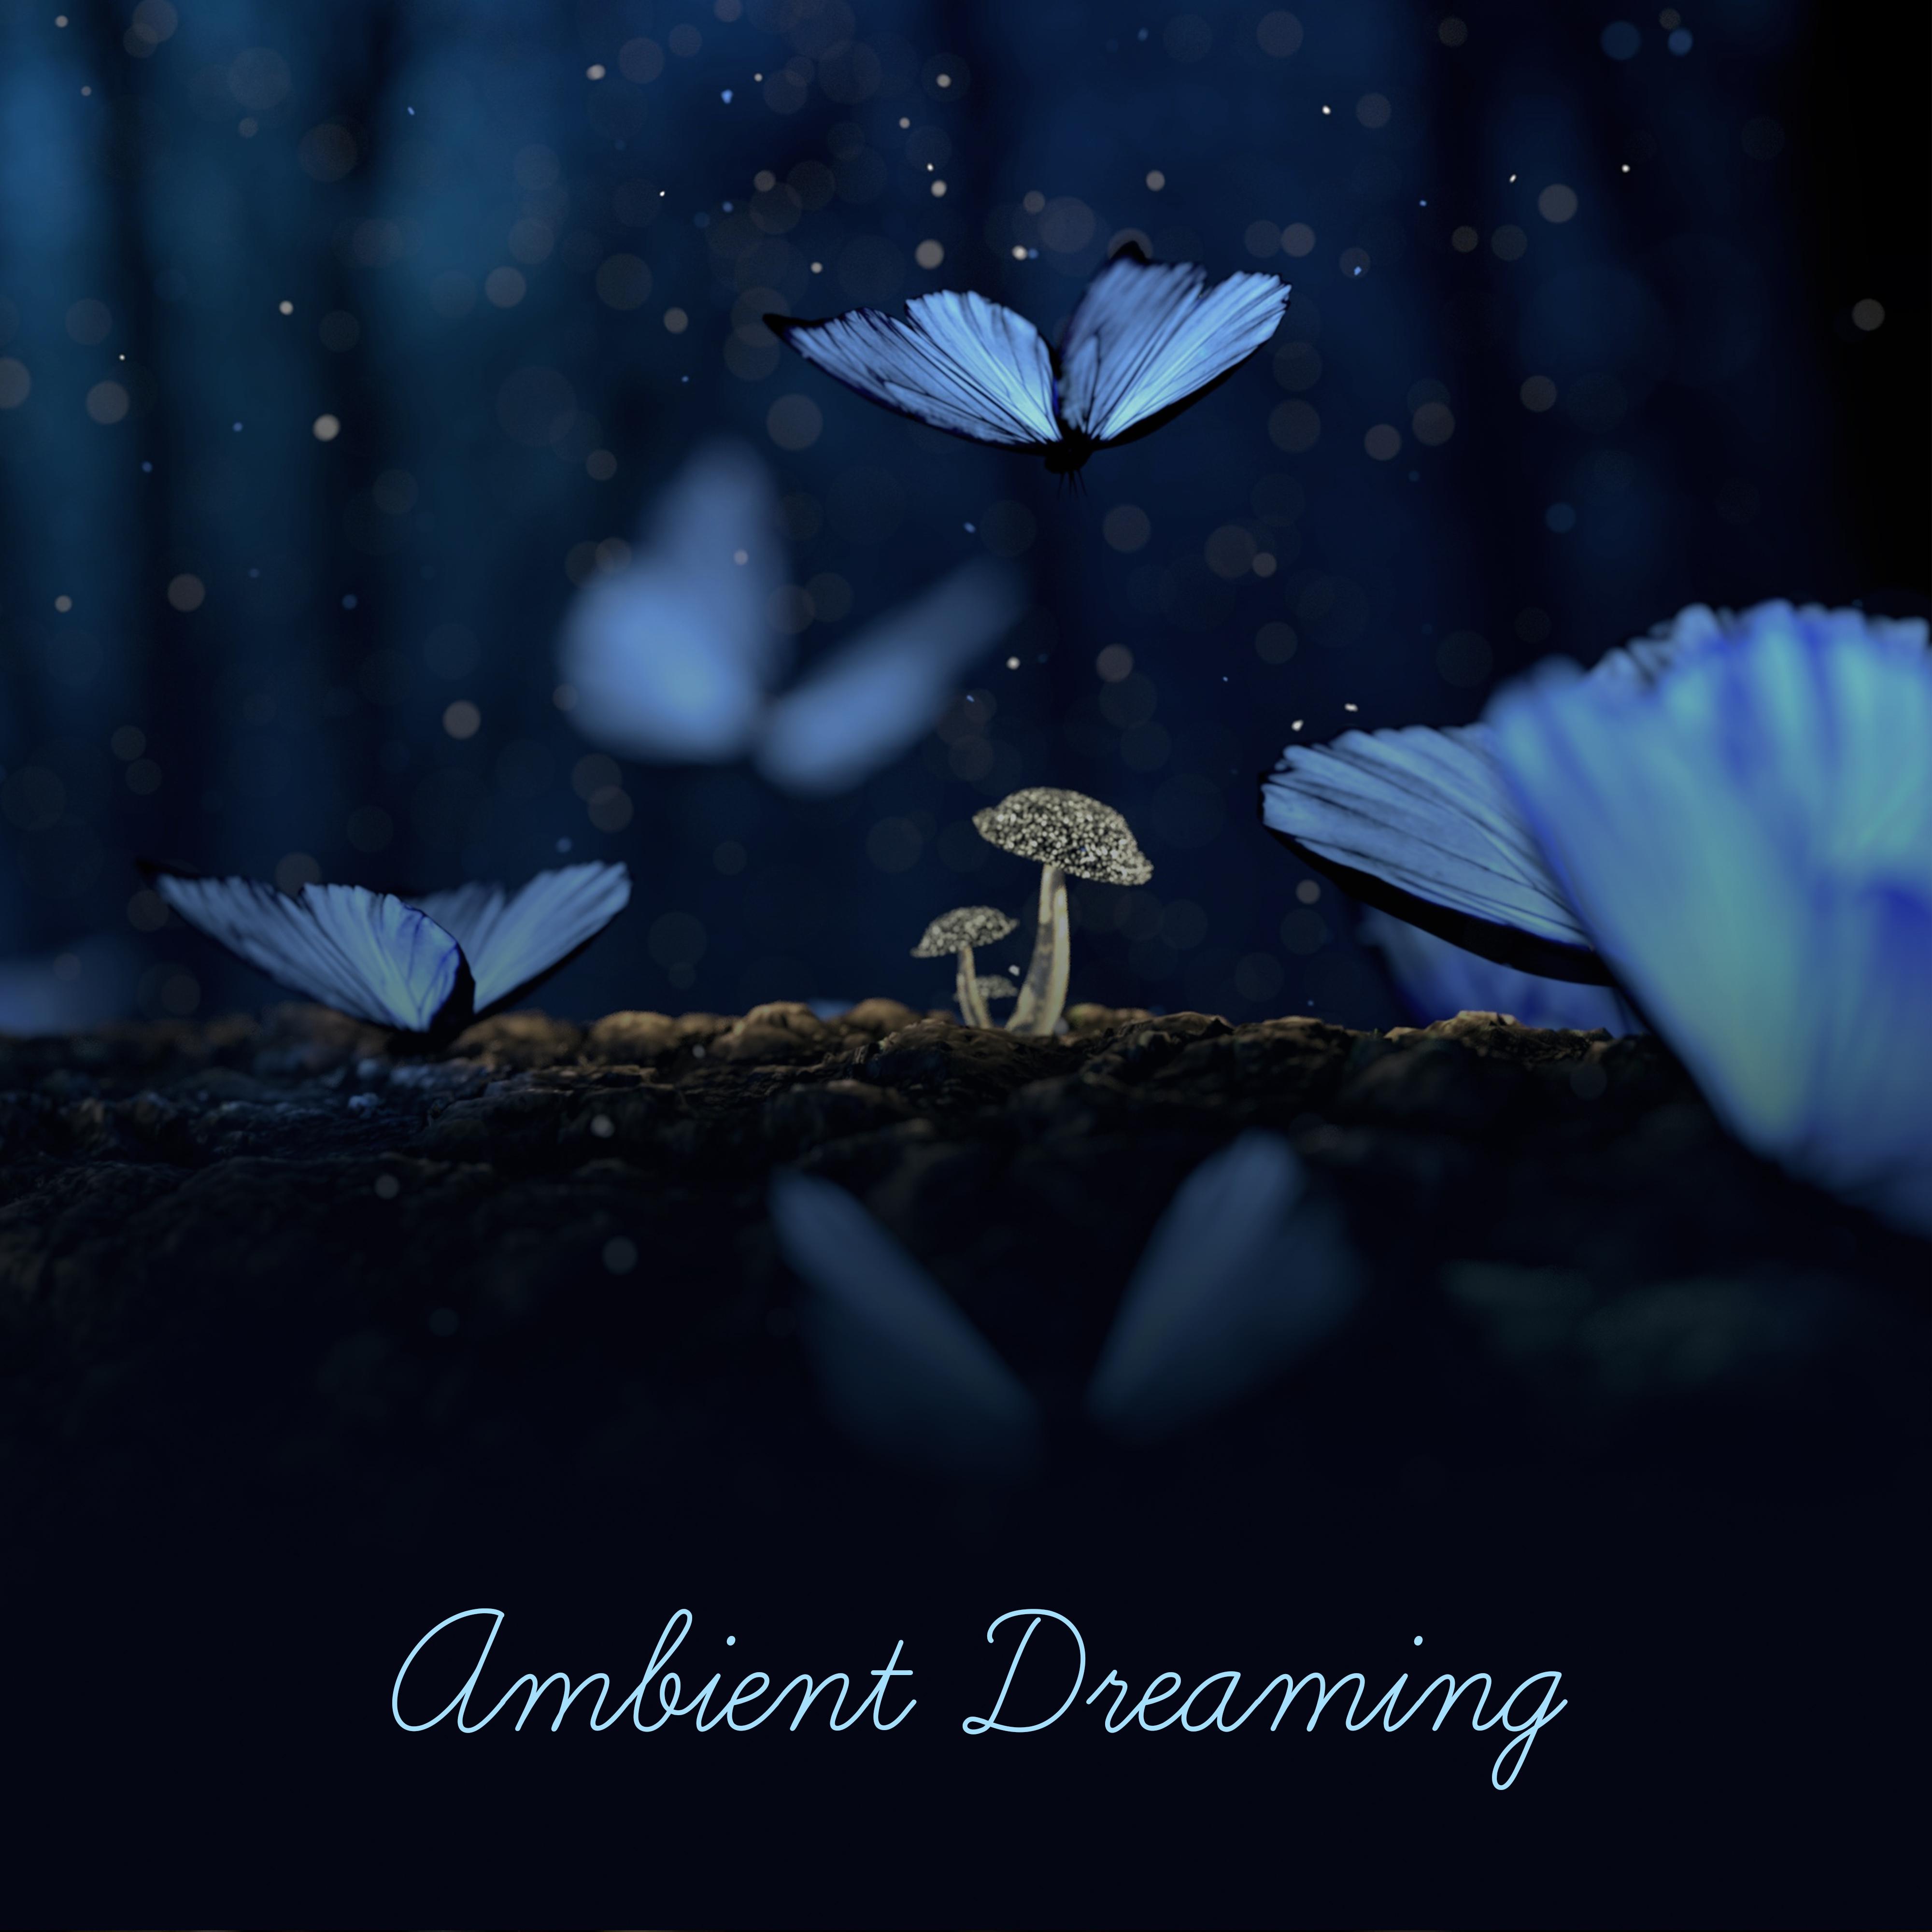 Ambient Dreaming – Soft Sounds for Sleep, Relaxation, New Age Music at Night, Sweet Lullabies, Tranquil Sleep, Harmony, Peaceful Mind, Calm Night